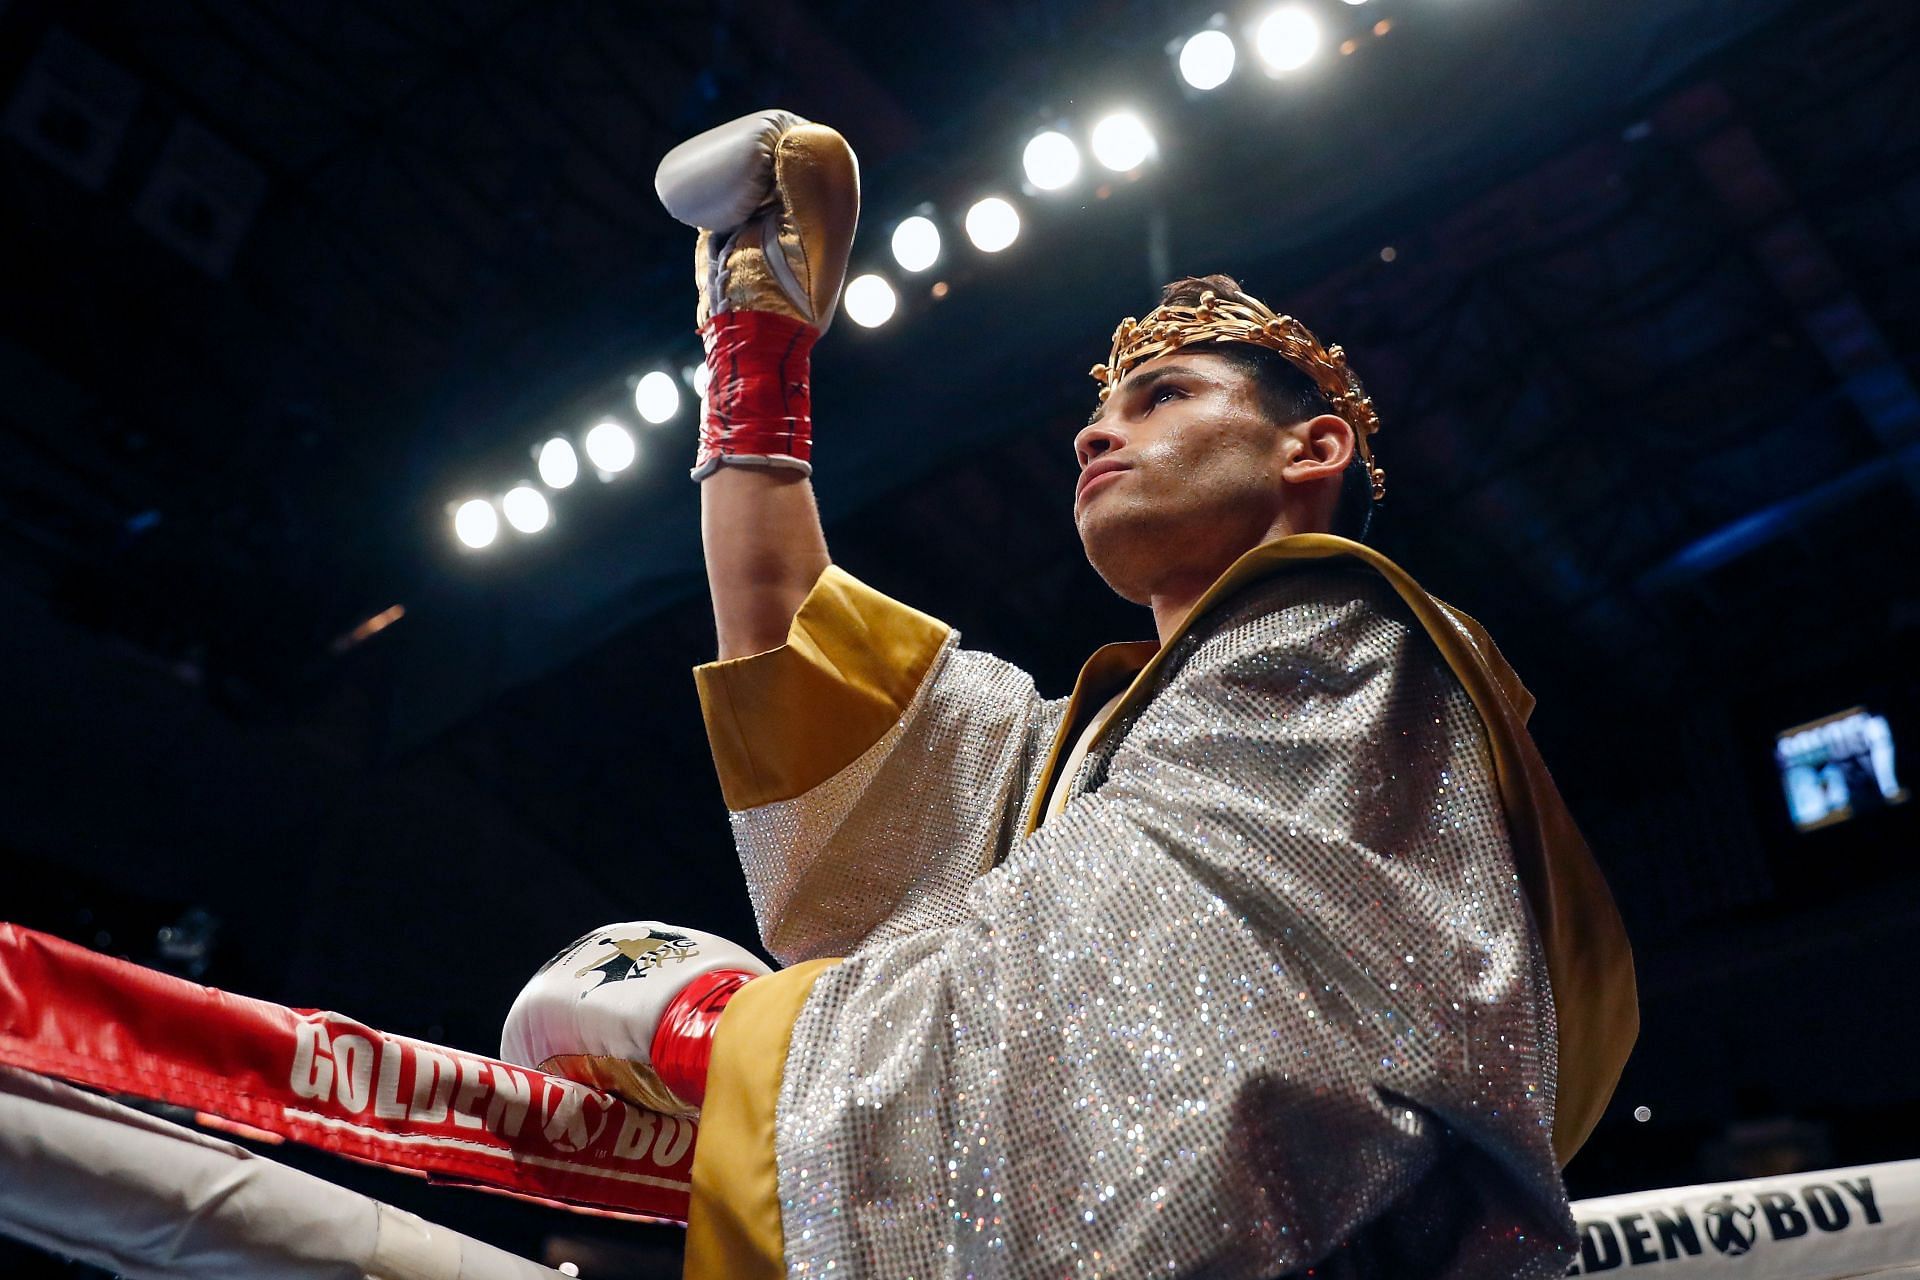 Ryan Garcia inside the ring before his fight against Luke Campbell